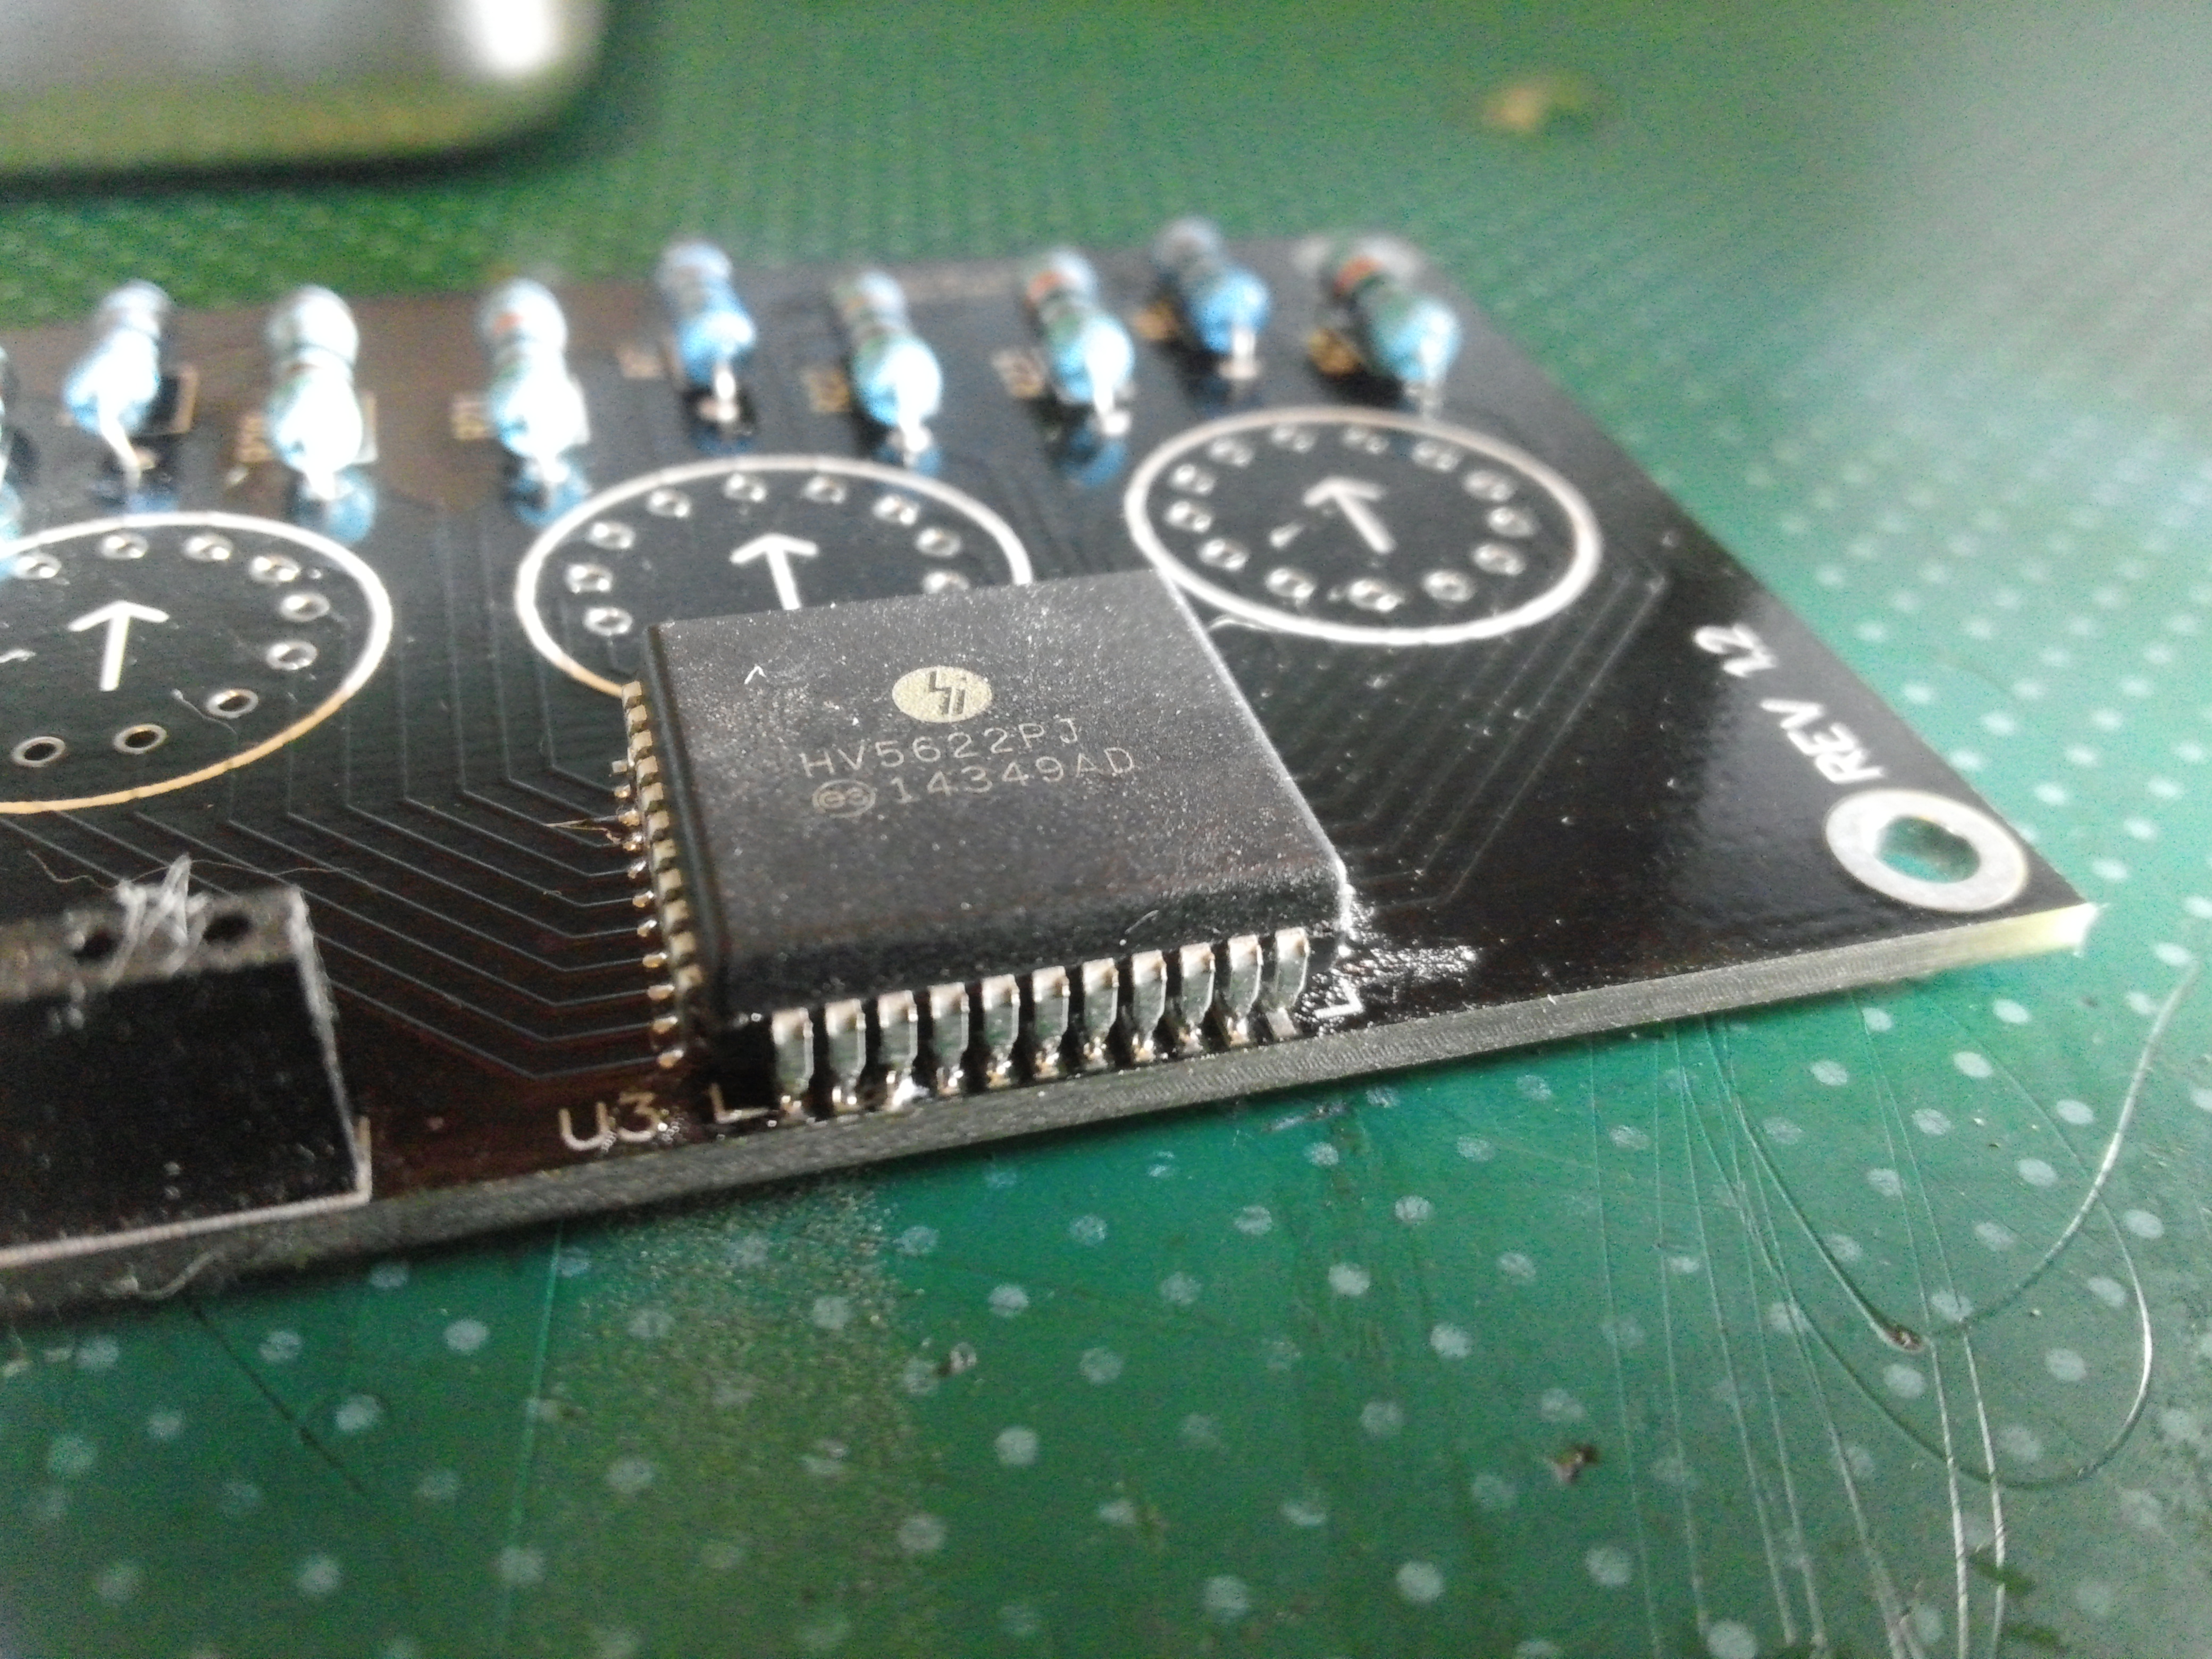 One of the HV5622 chips closeup